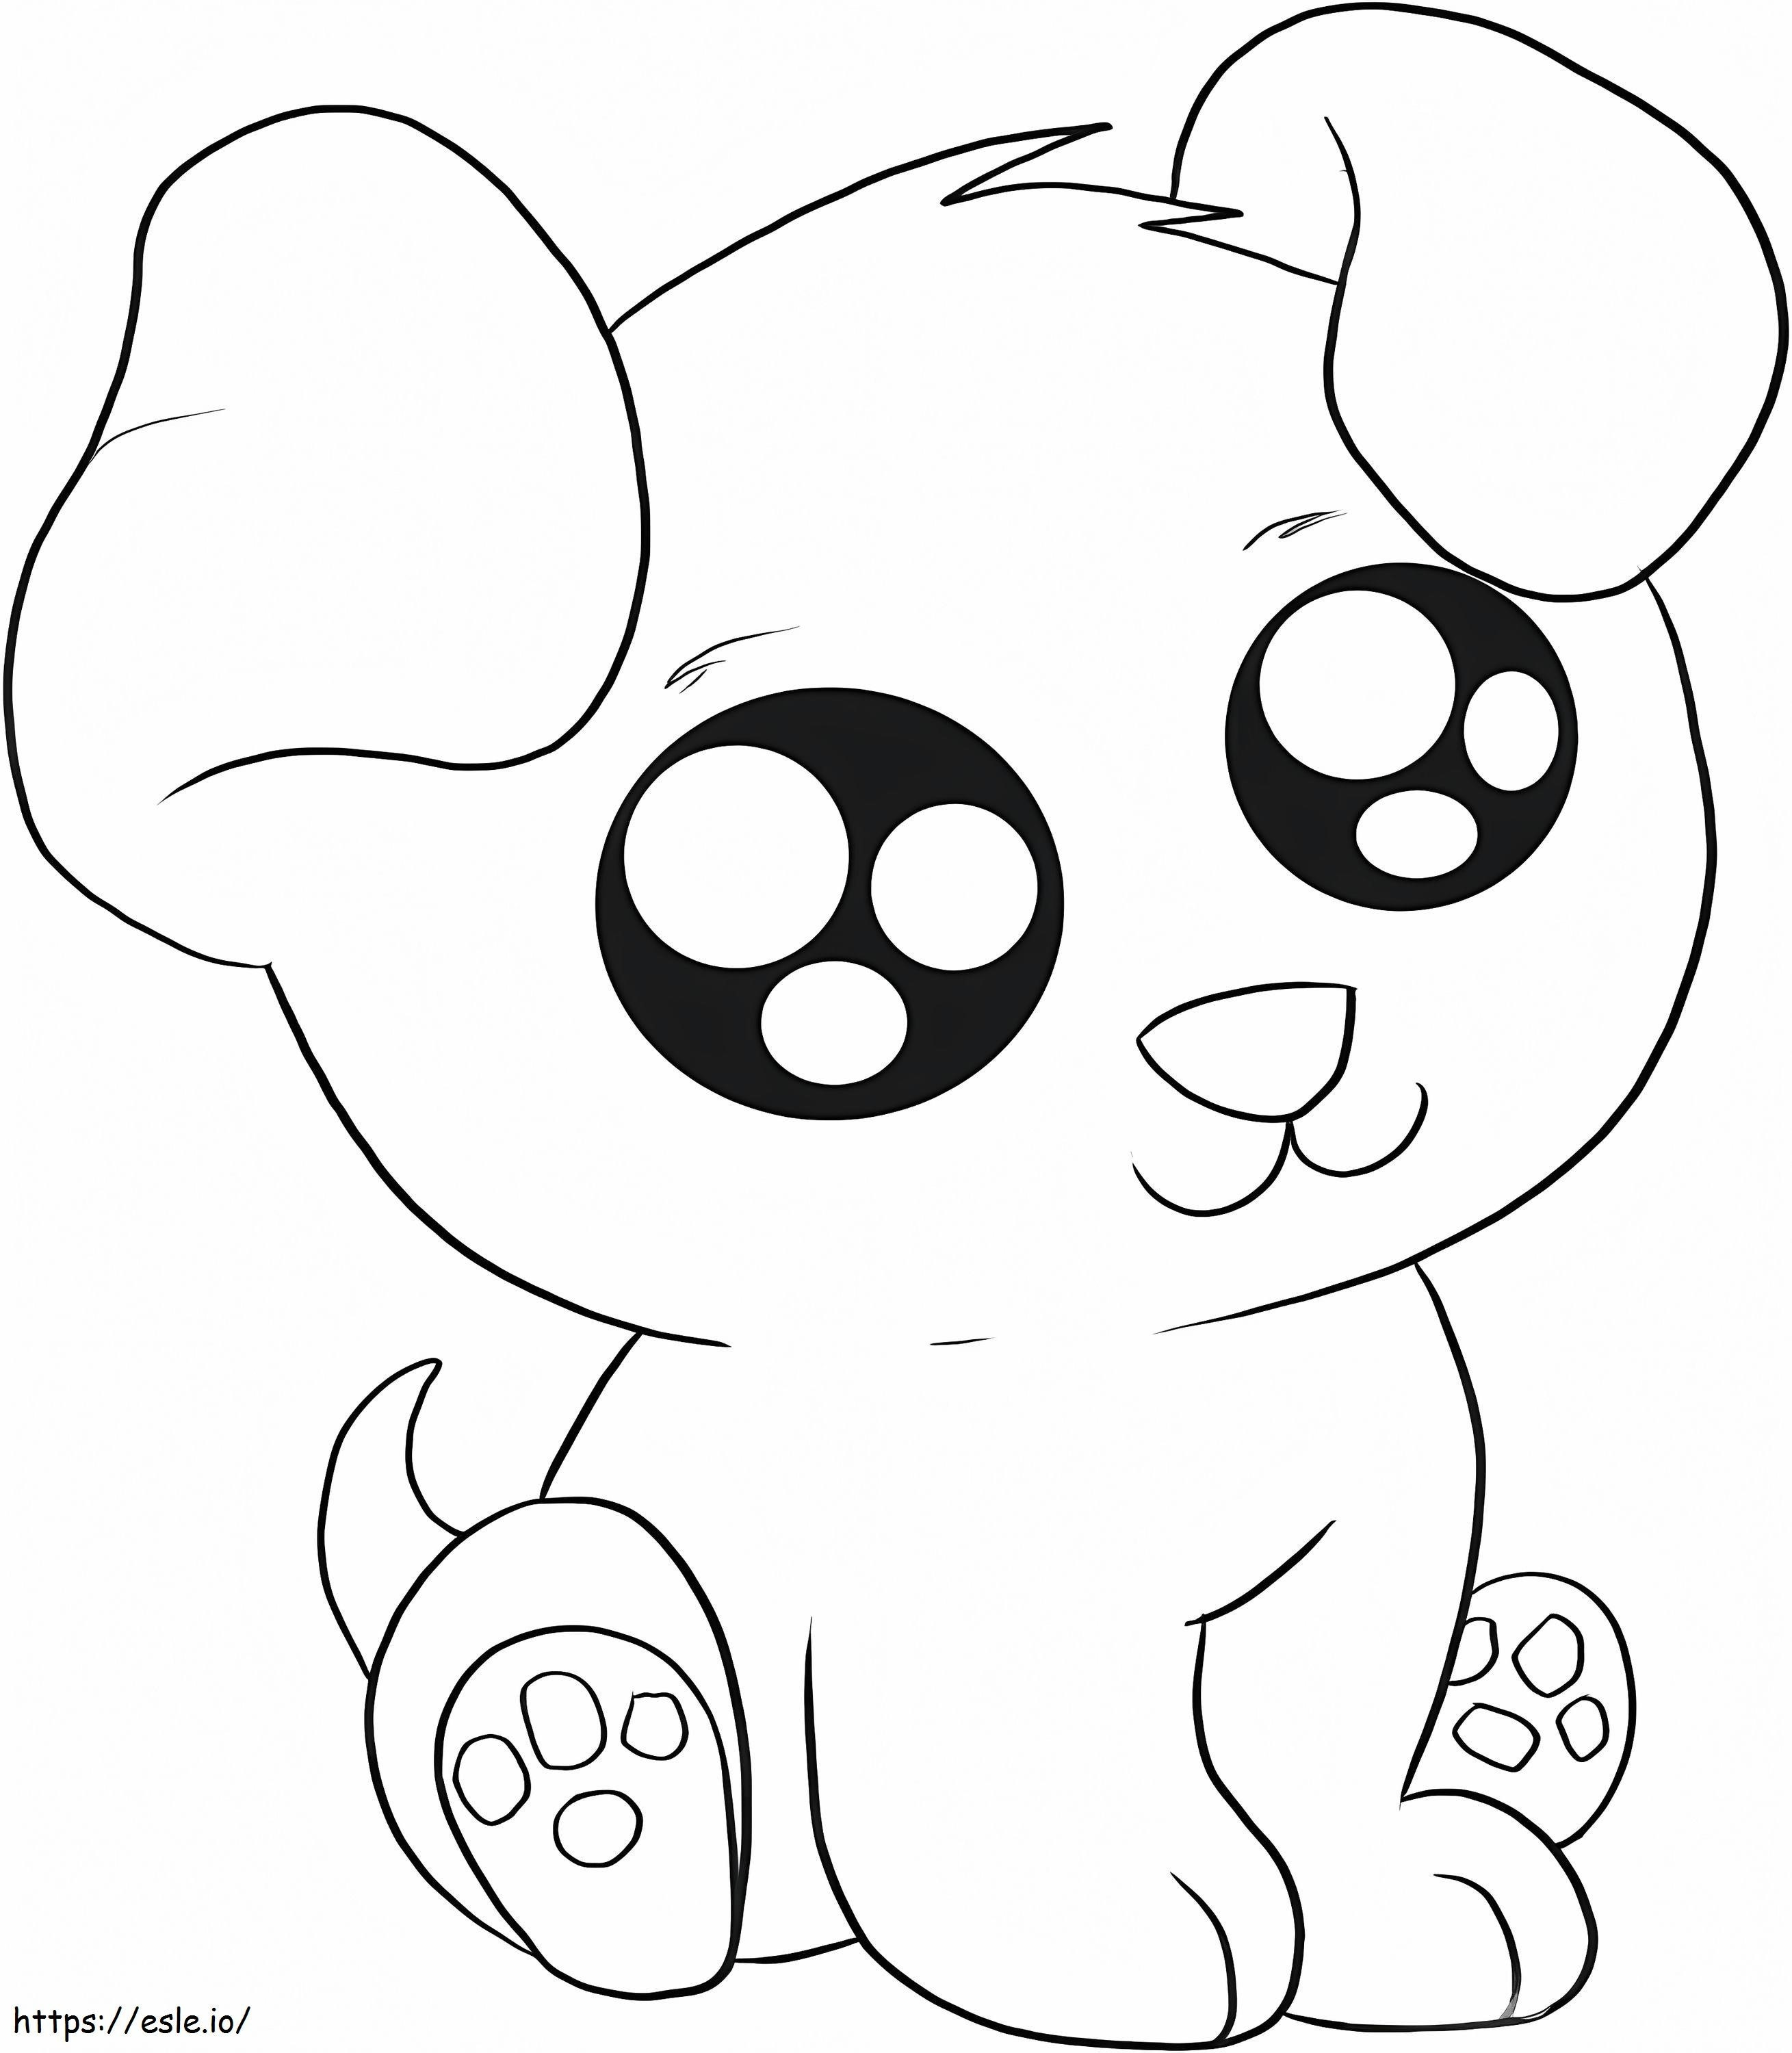 Puppy With Big Eyes coloring page